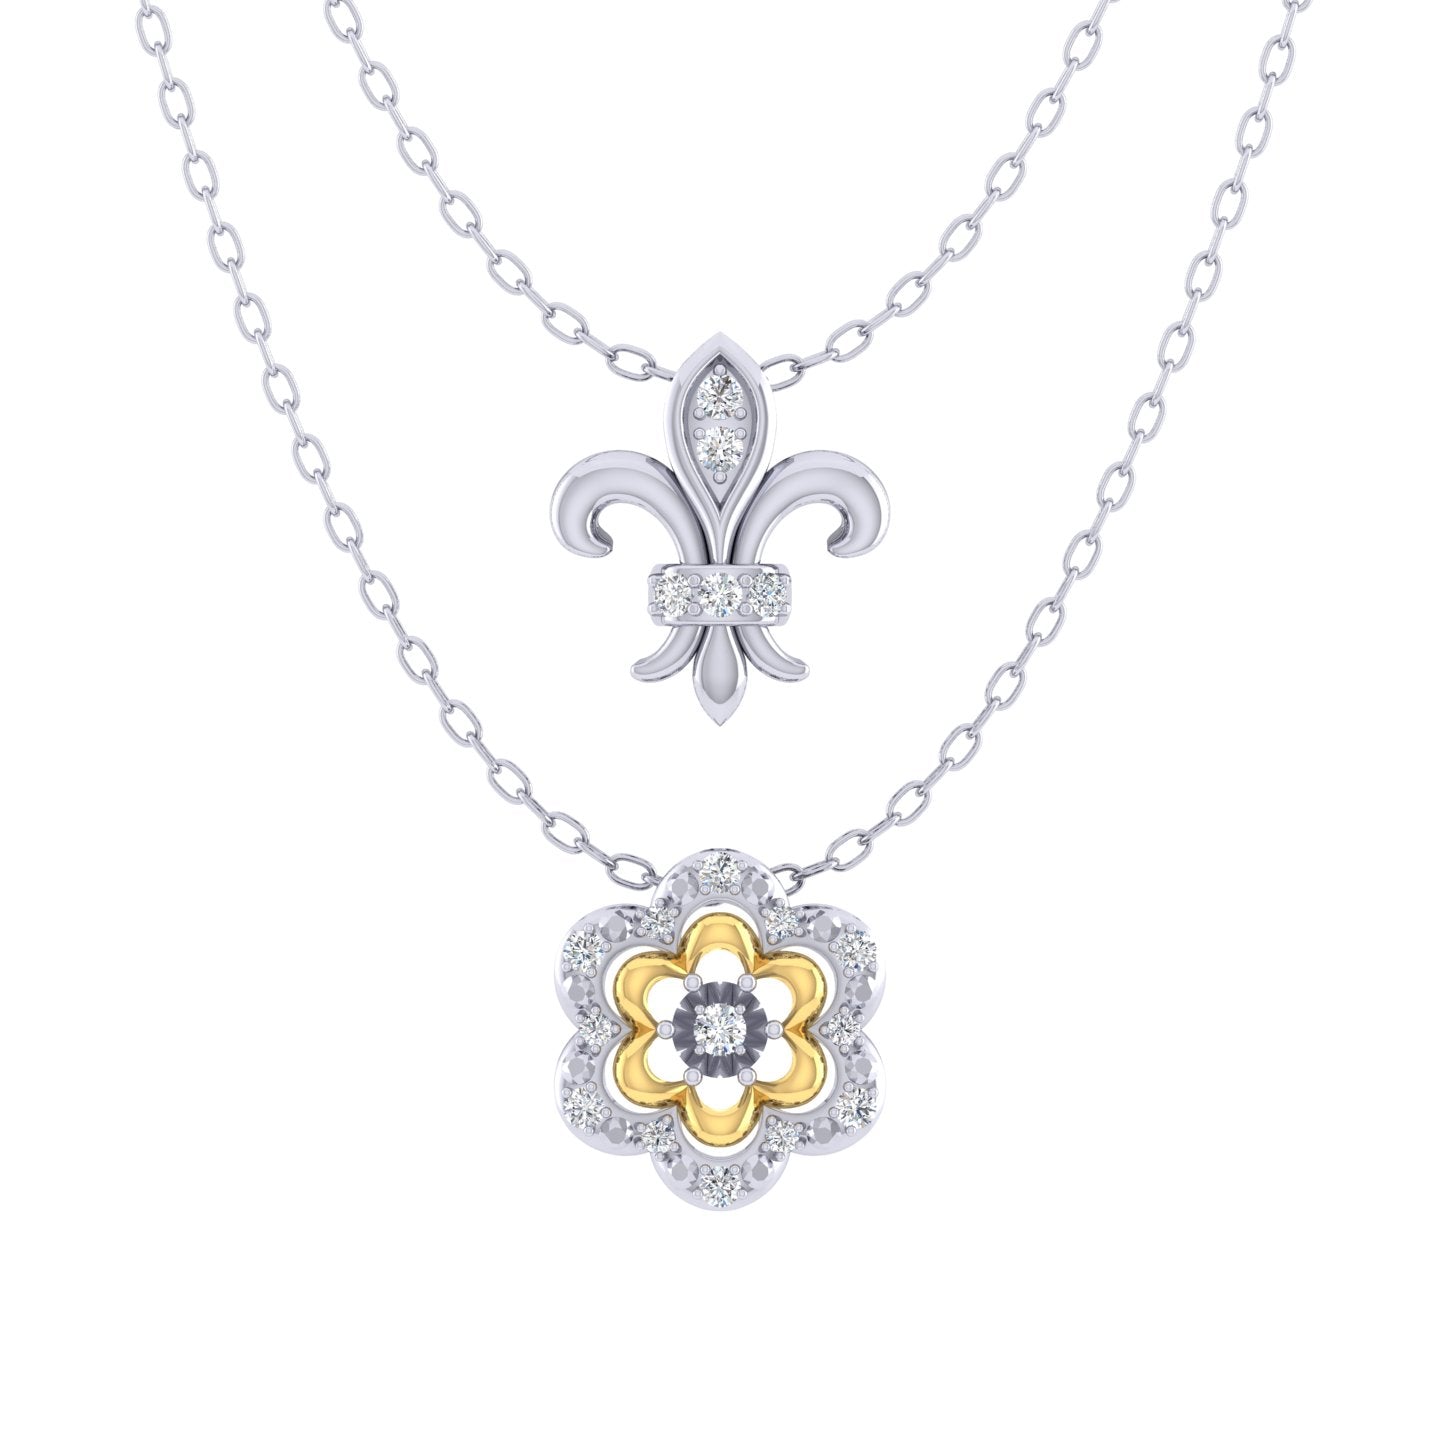 Fleur De Lis and Flower Layered 1/10 Cttw Natural Diamond Pendant Necklace set in 925 Sterling (Silver & Yellow Gold)… fine jewelry